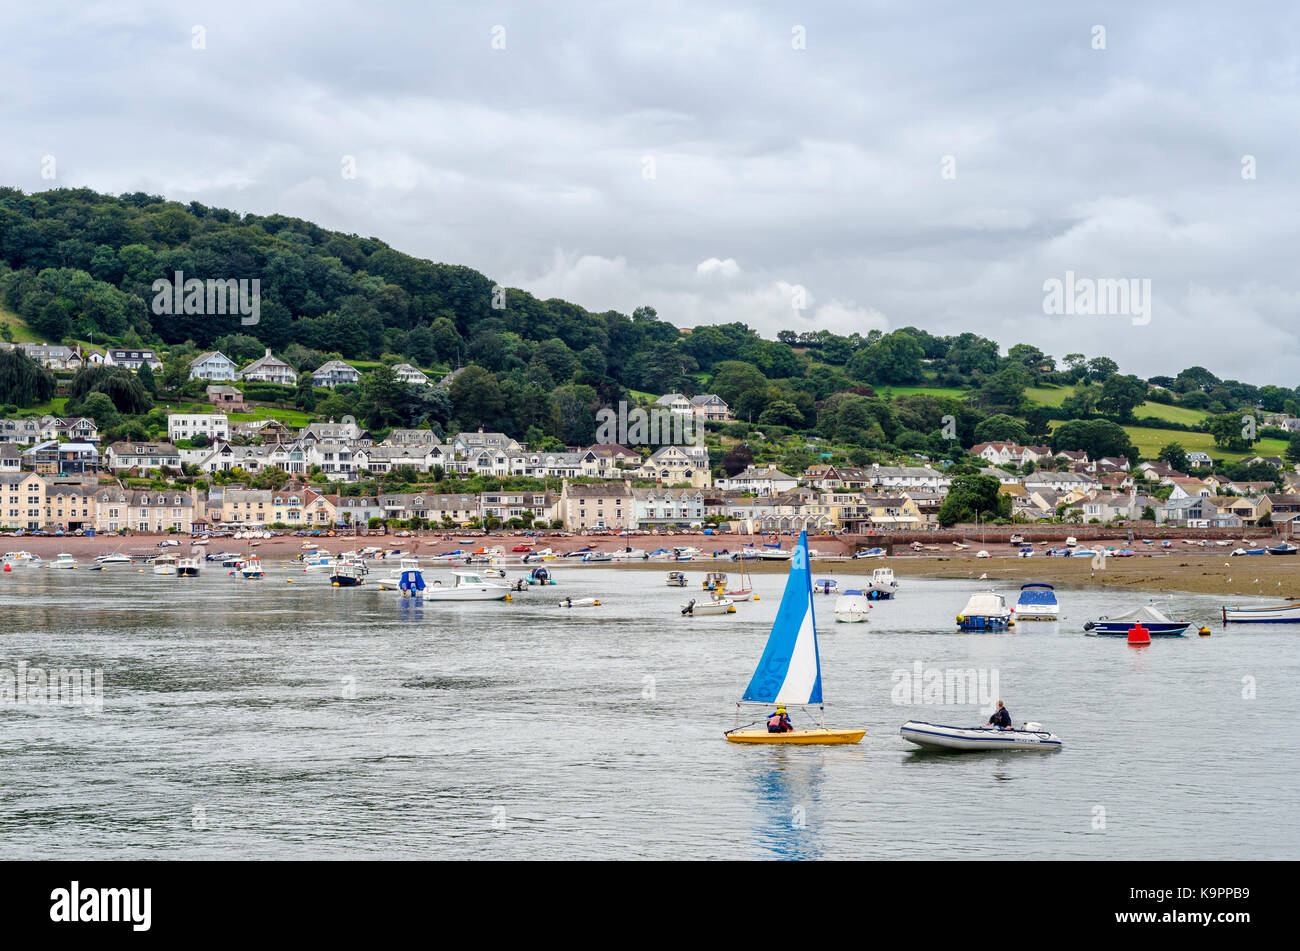 Boats on the estuary mouth of the River Teign, Teignmouth, Devon, England, UK Stock Photo